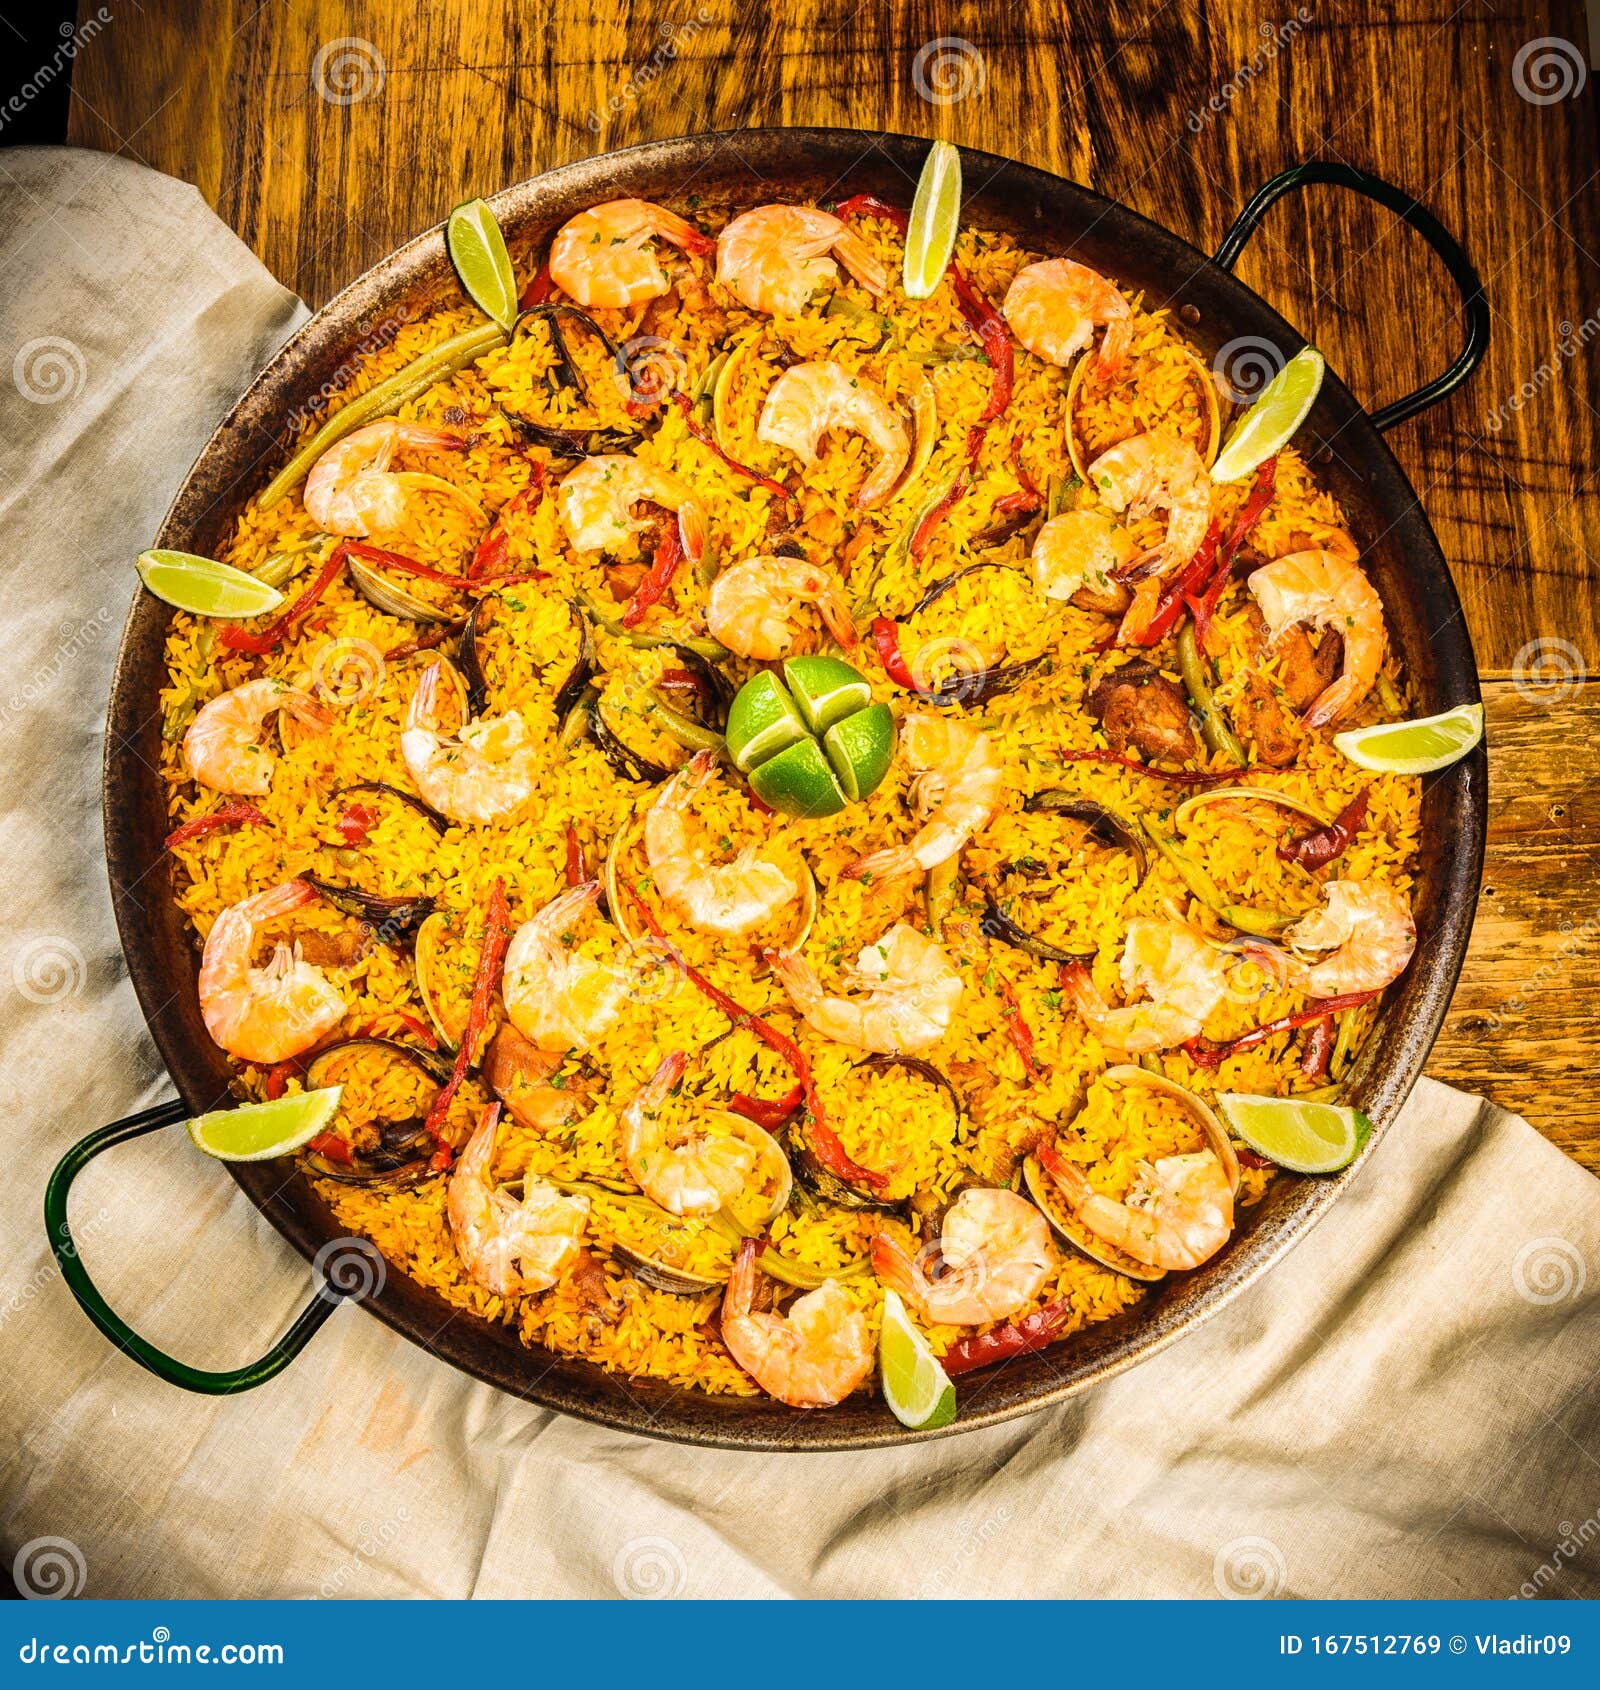 spanish paella with seafood, rice and bell peppers